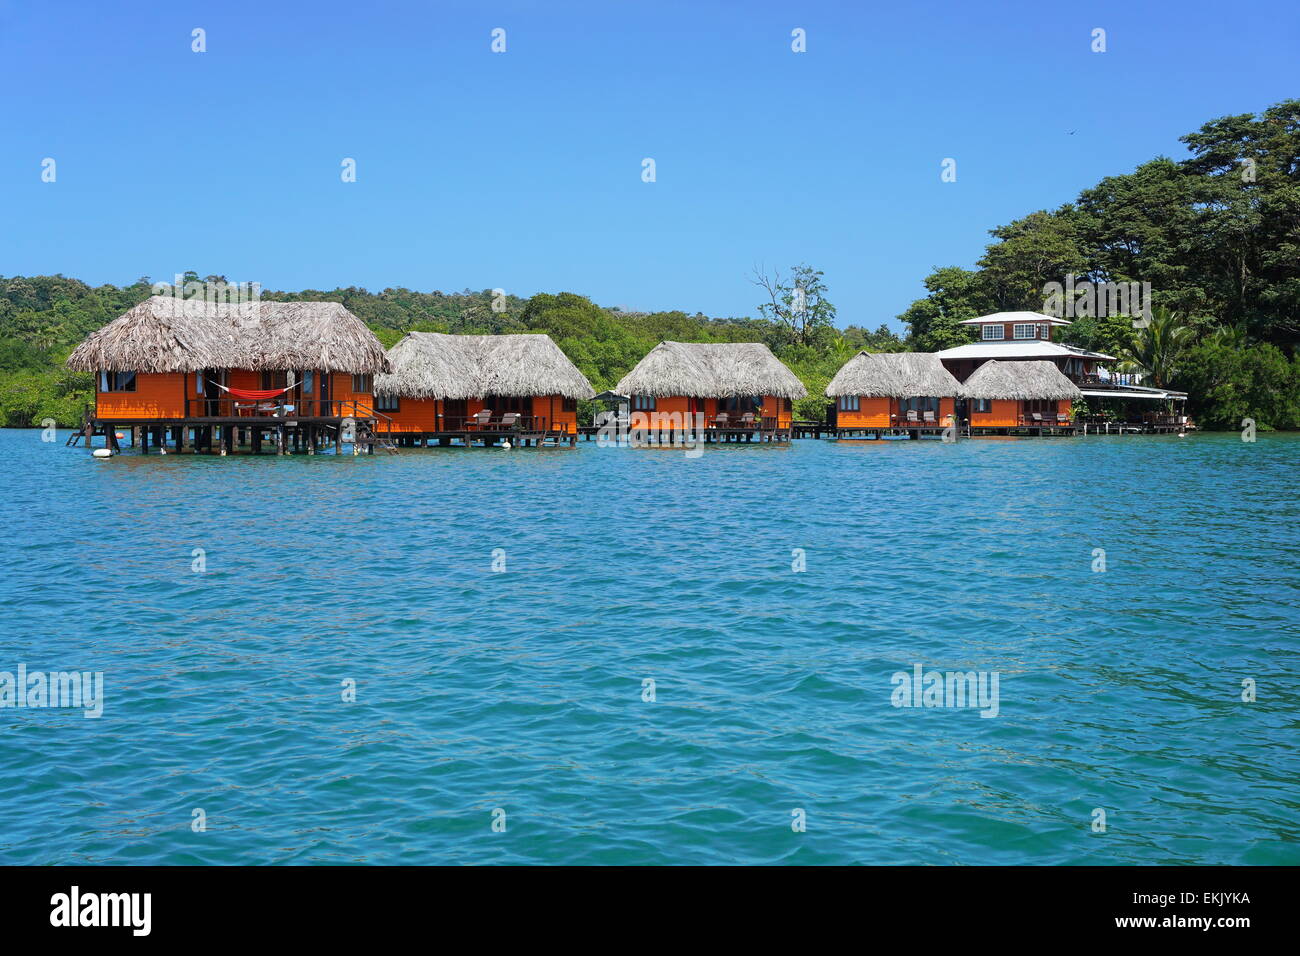 Tropical resort over the water with thatched bungalows, Bocas del Toro, Panama, Central America Stock Photo